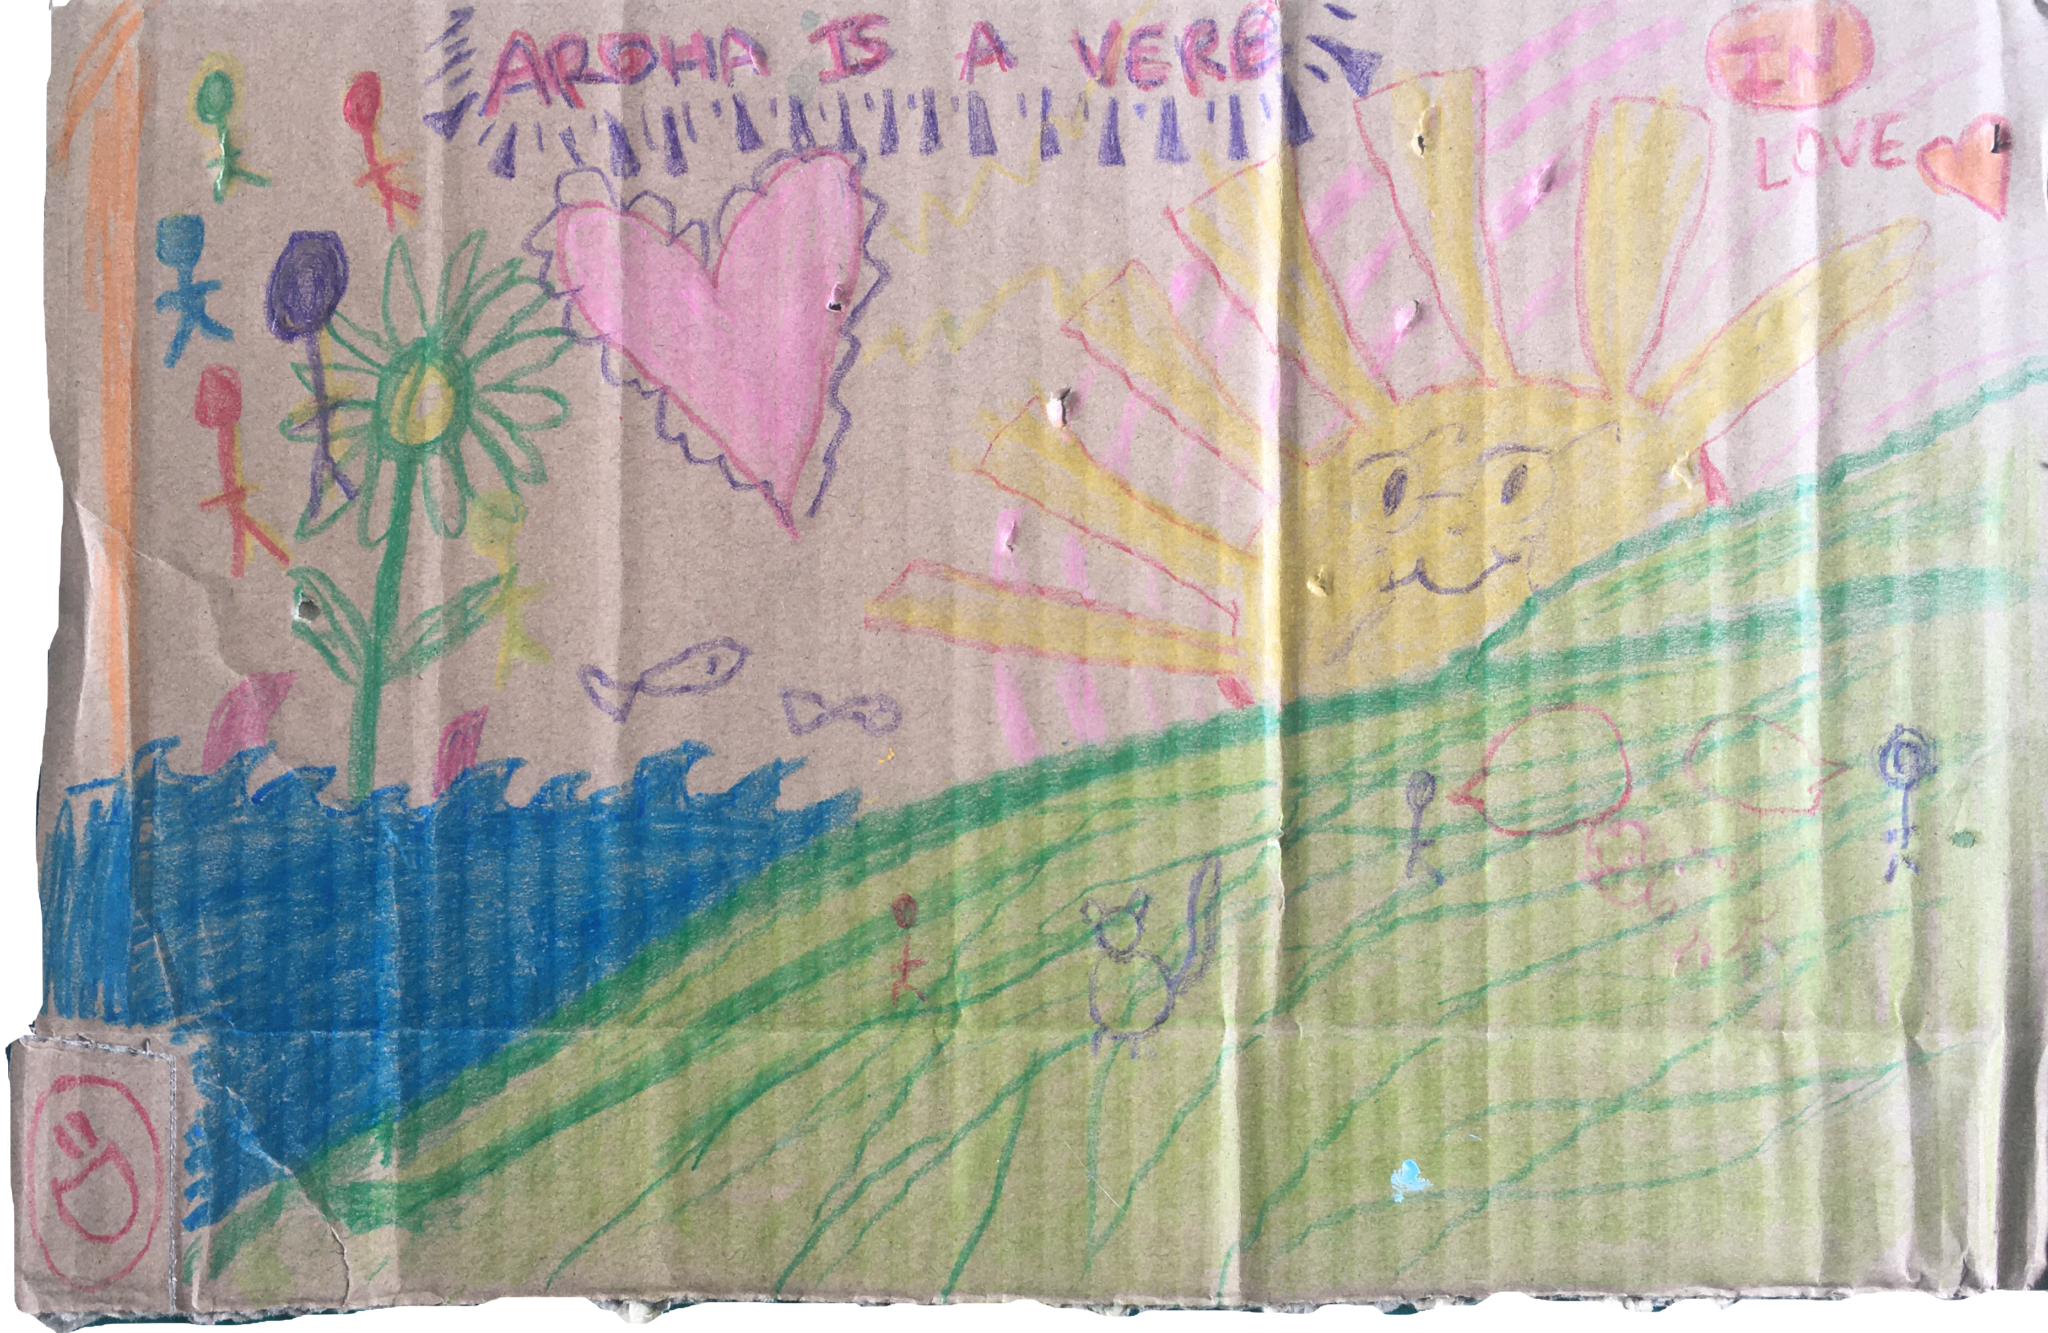 Cardboard art work with hearts flowers and a sunshine on a grassy hill and text that says Aroha